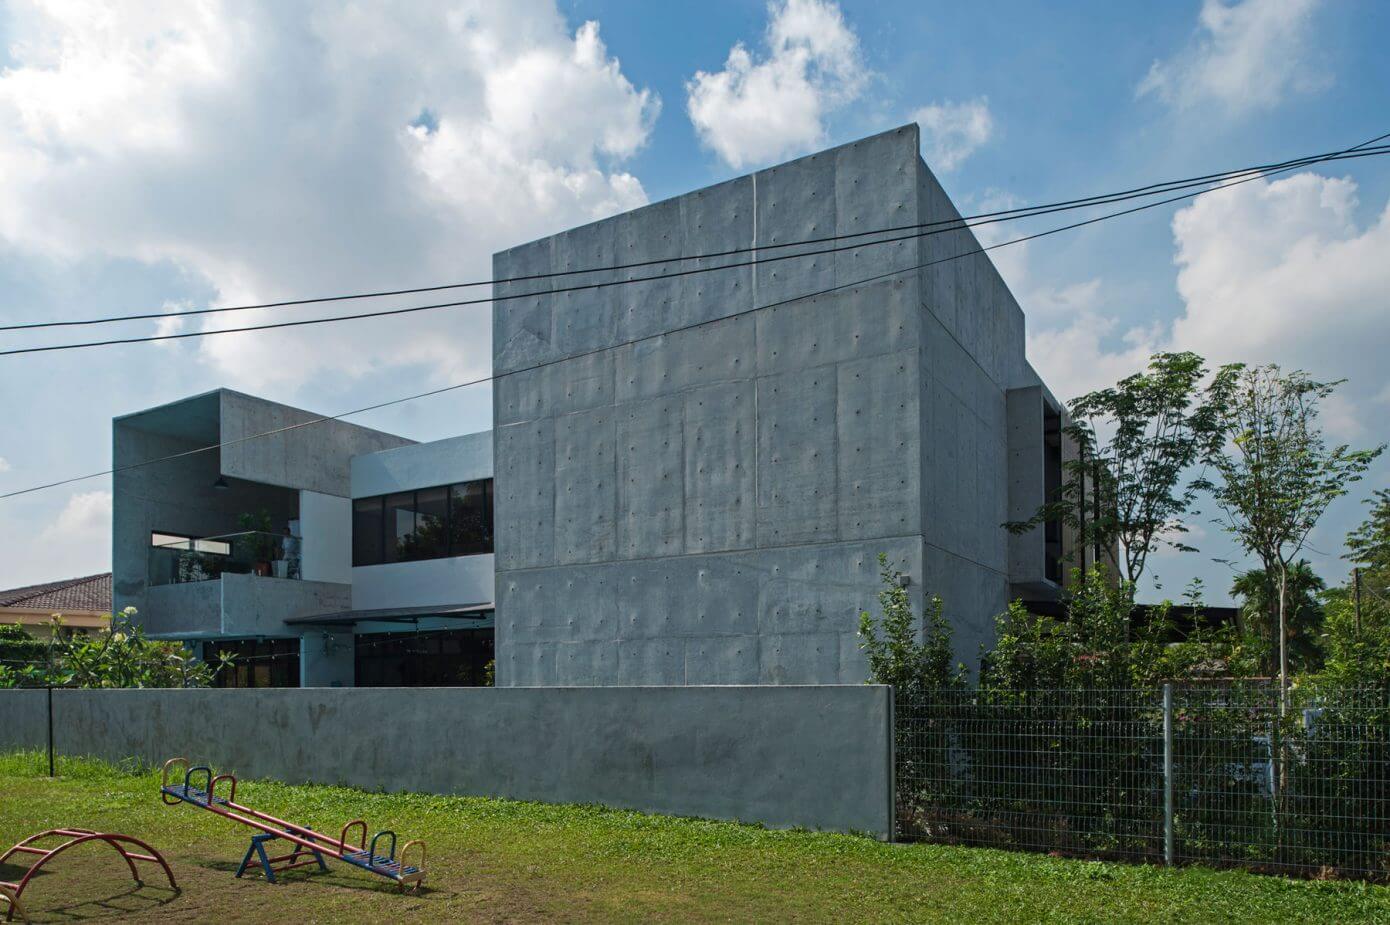 Concrete Residence in Malaysia by Seshan Design